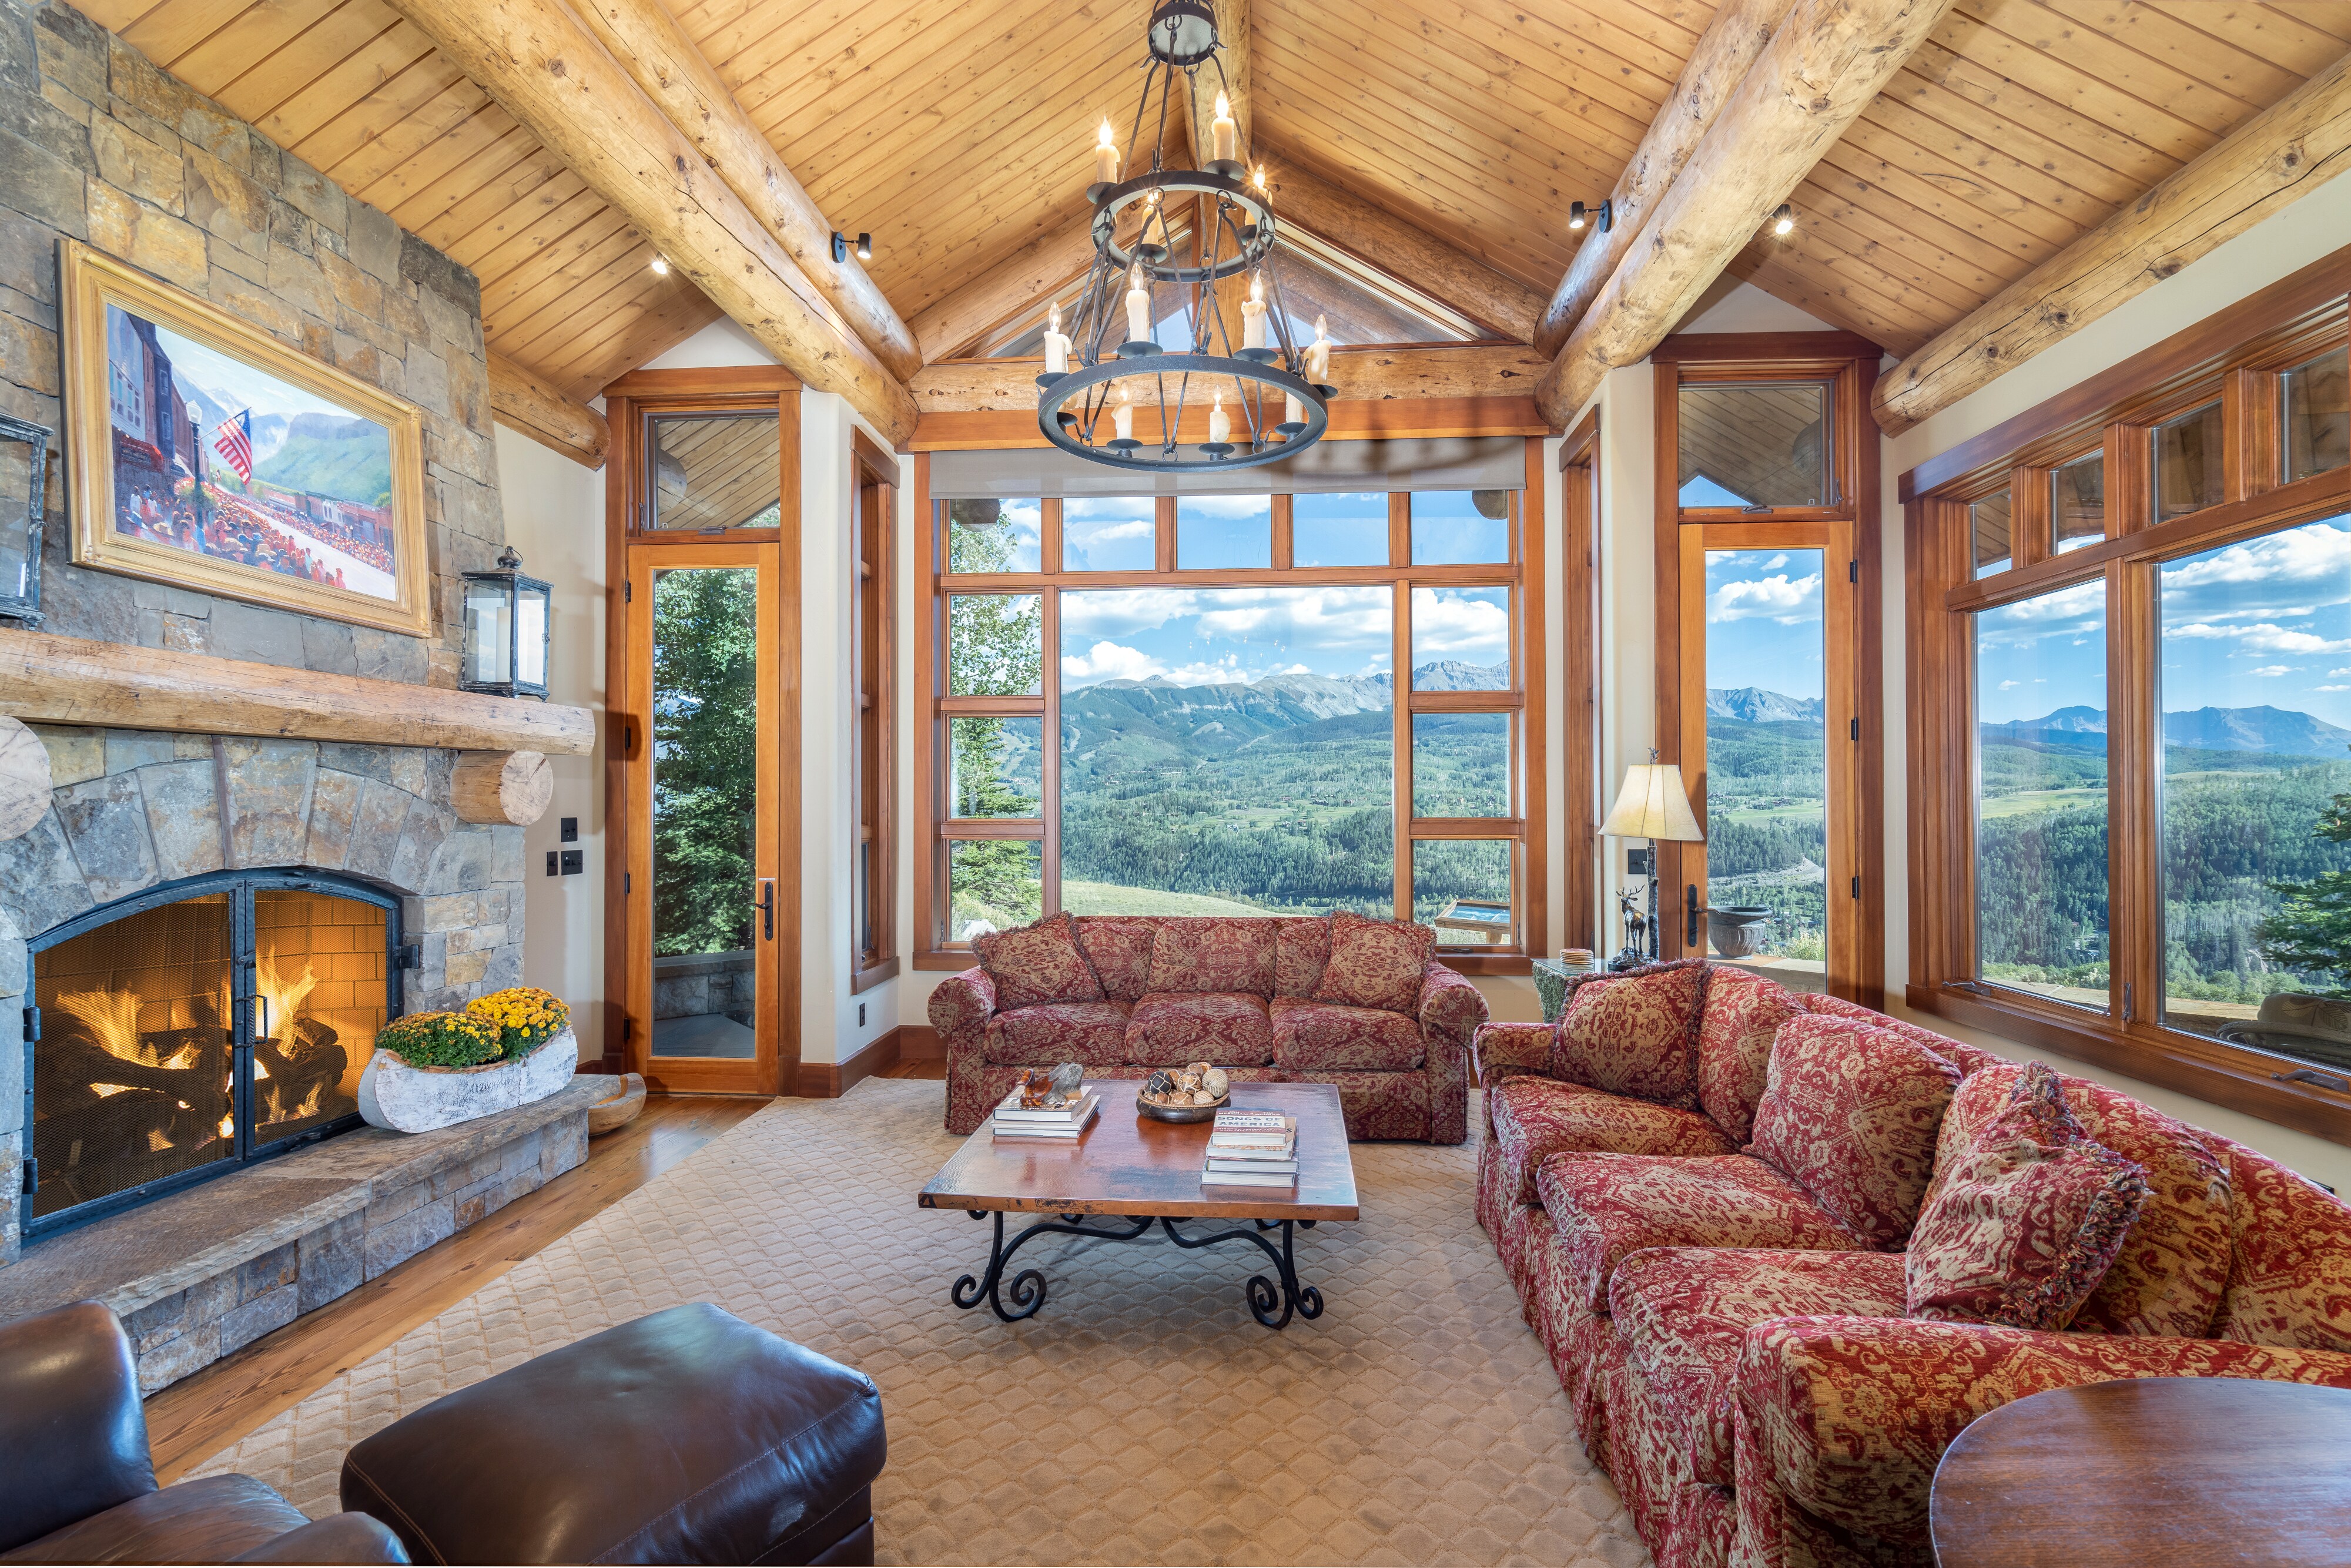 Unbeatable views by the fireplace.